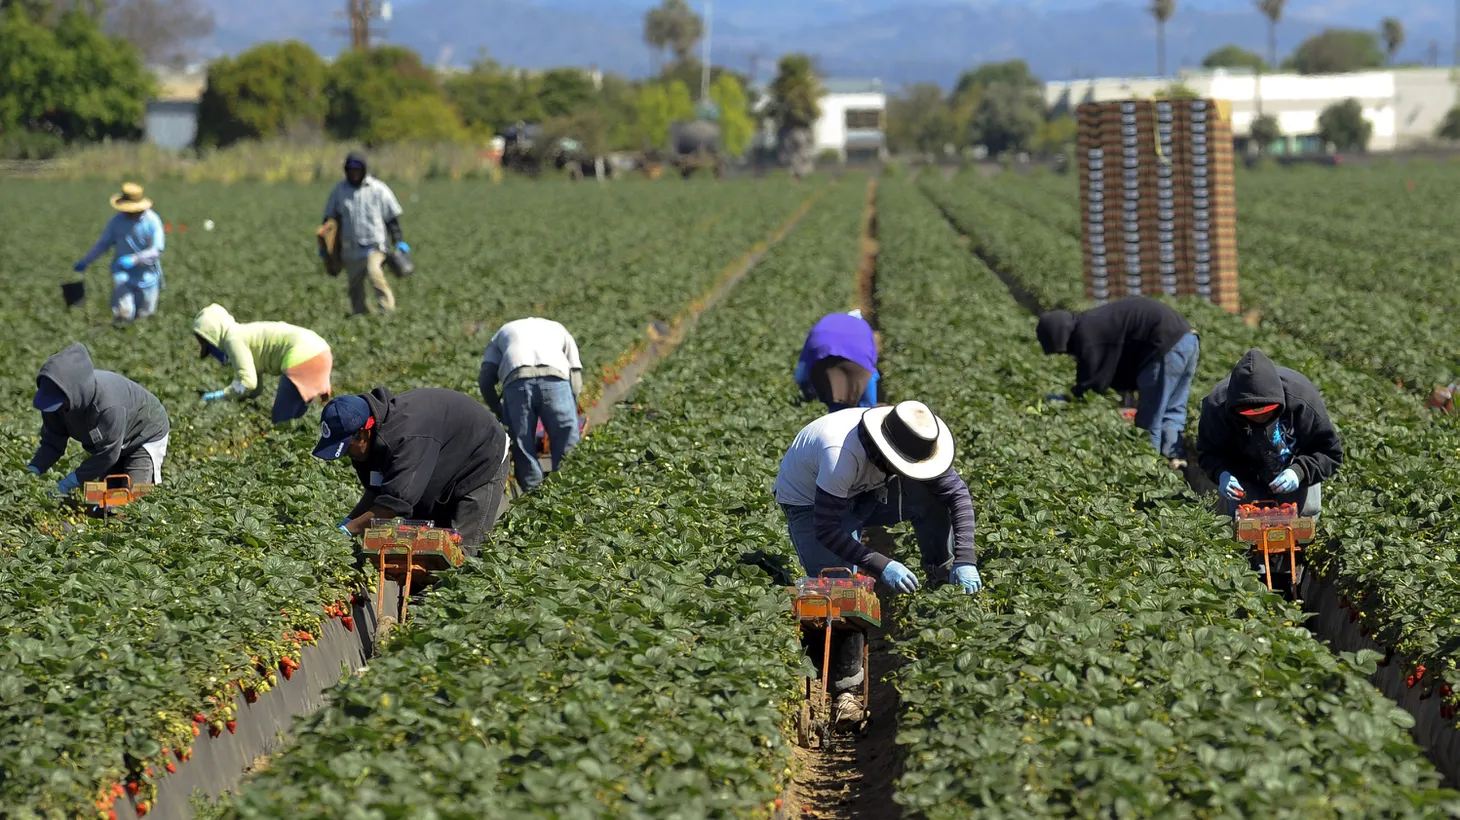 Farmworkers are picking strawberries in Oxnard, CA. The coastal city is 60 miles north of Los Angeles and is the largest producer of strawberries in the state.